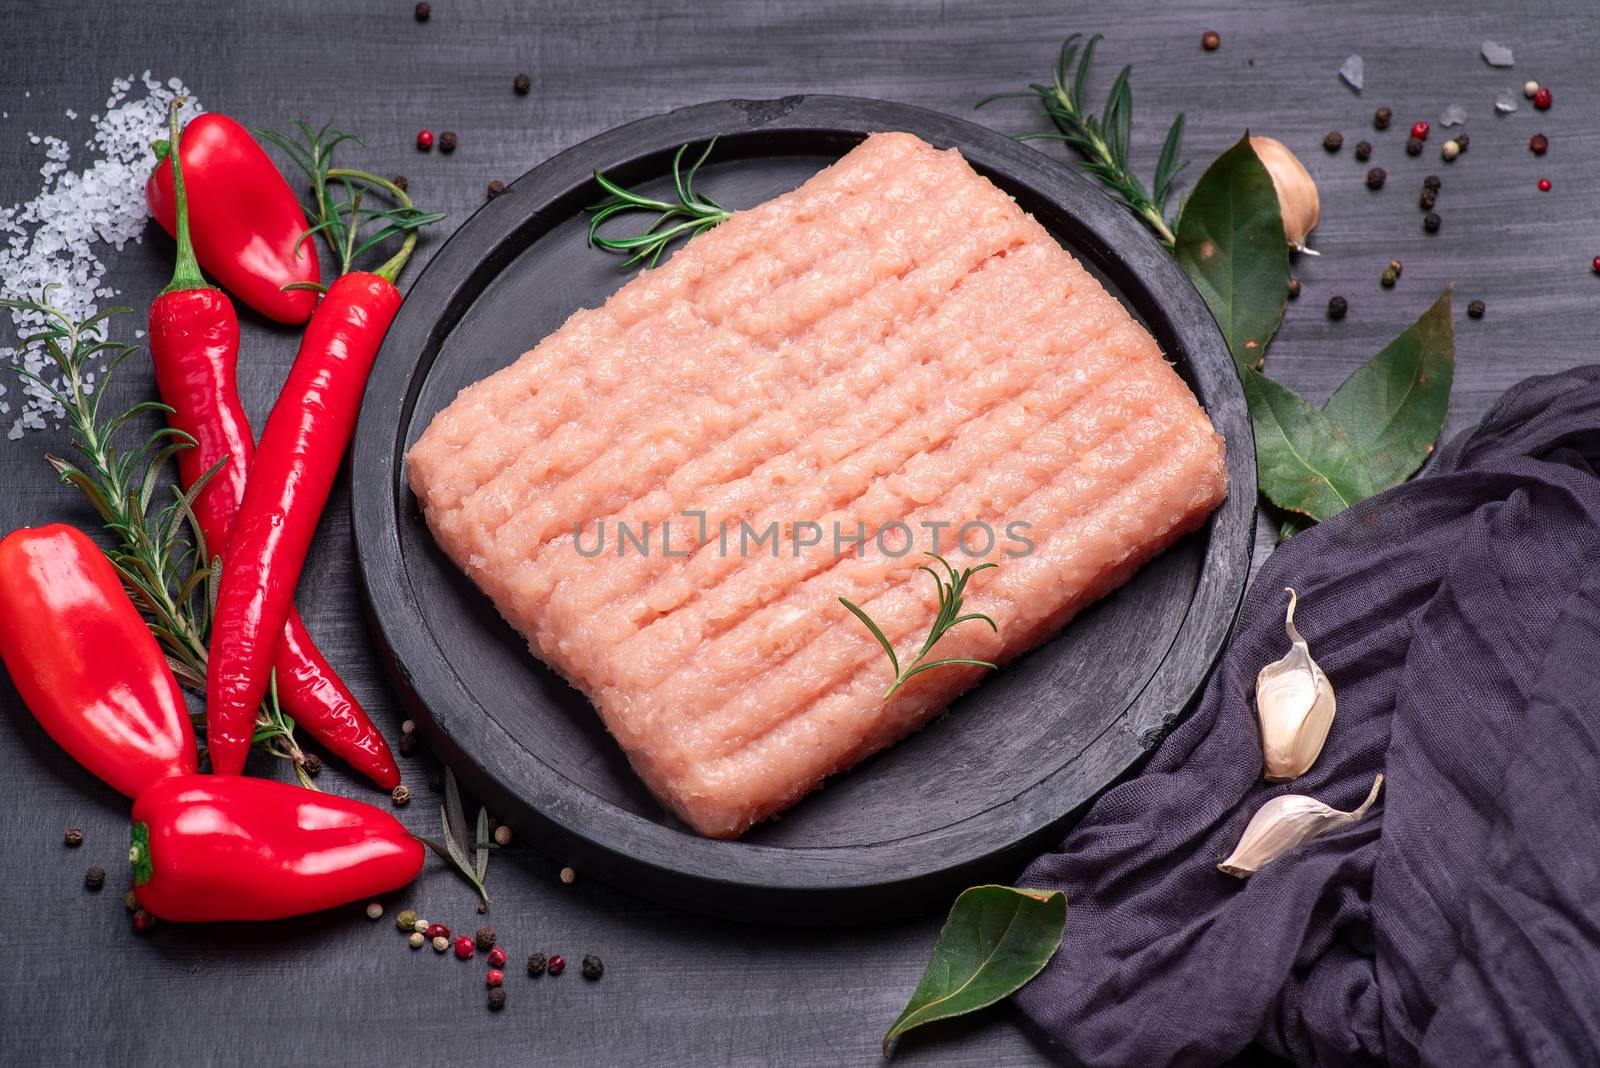 Raw Minced meat with herbs and spices,minced chicken close-up. Delicious diet meat. Top view.Raw minced chicken on a black plate on a wooden table.